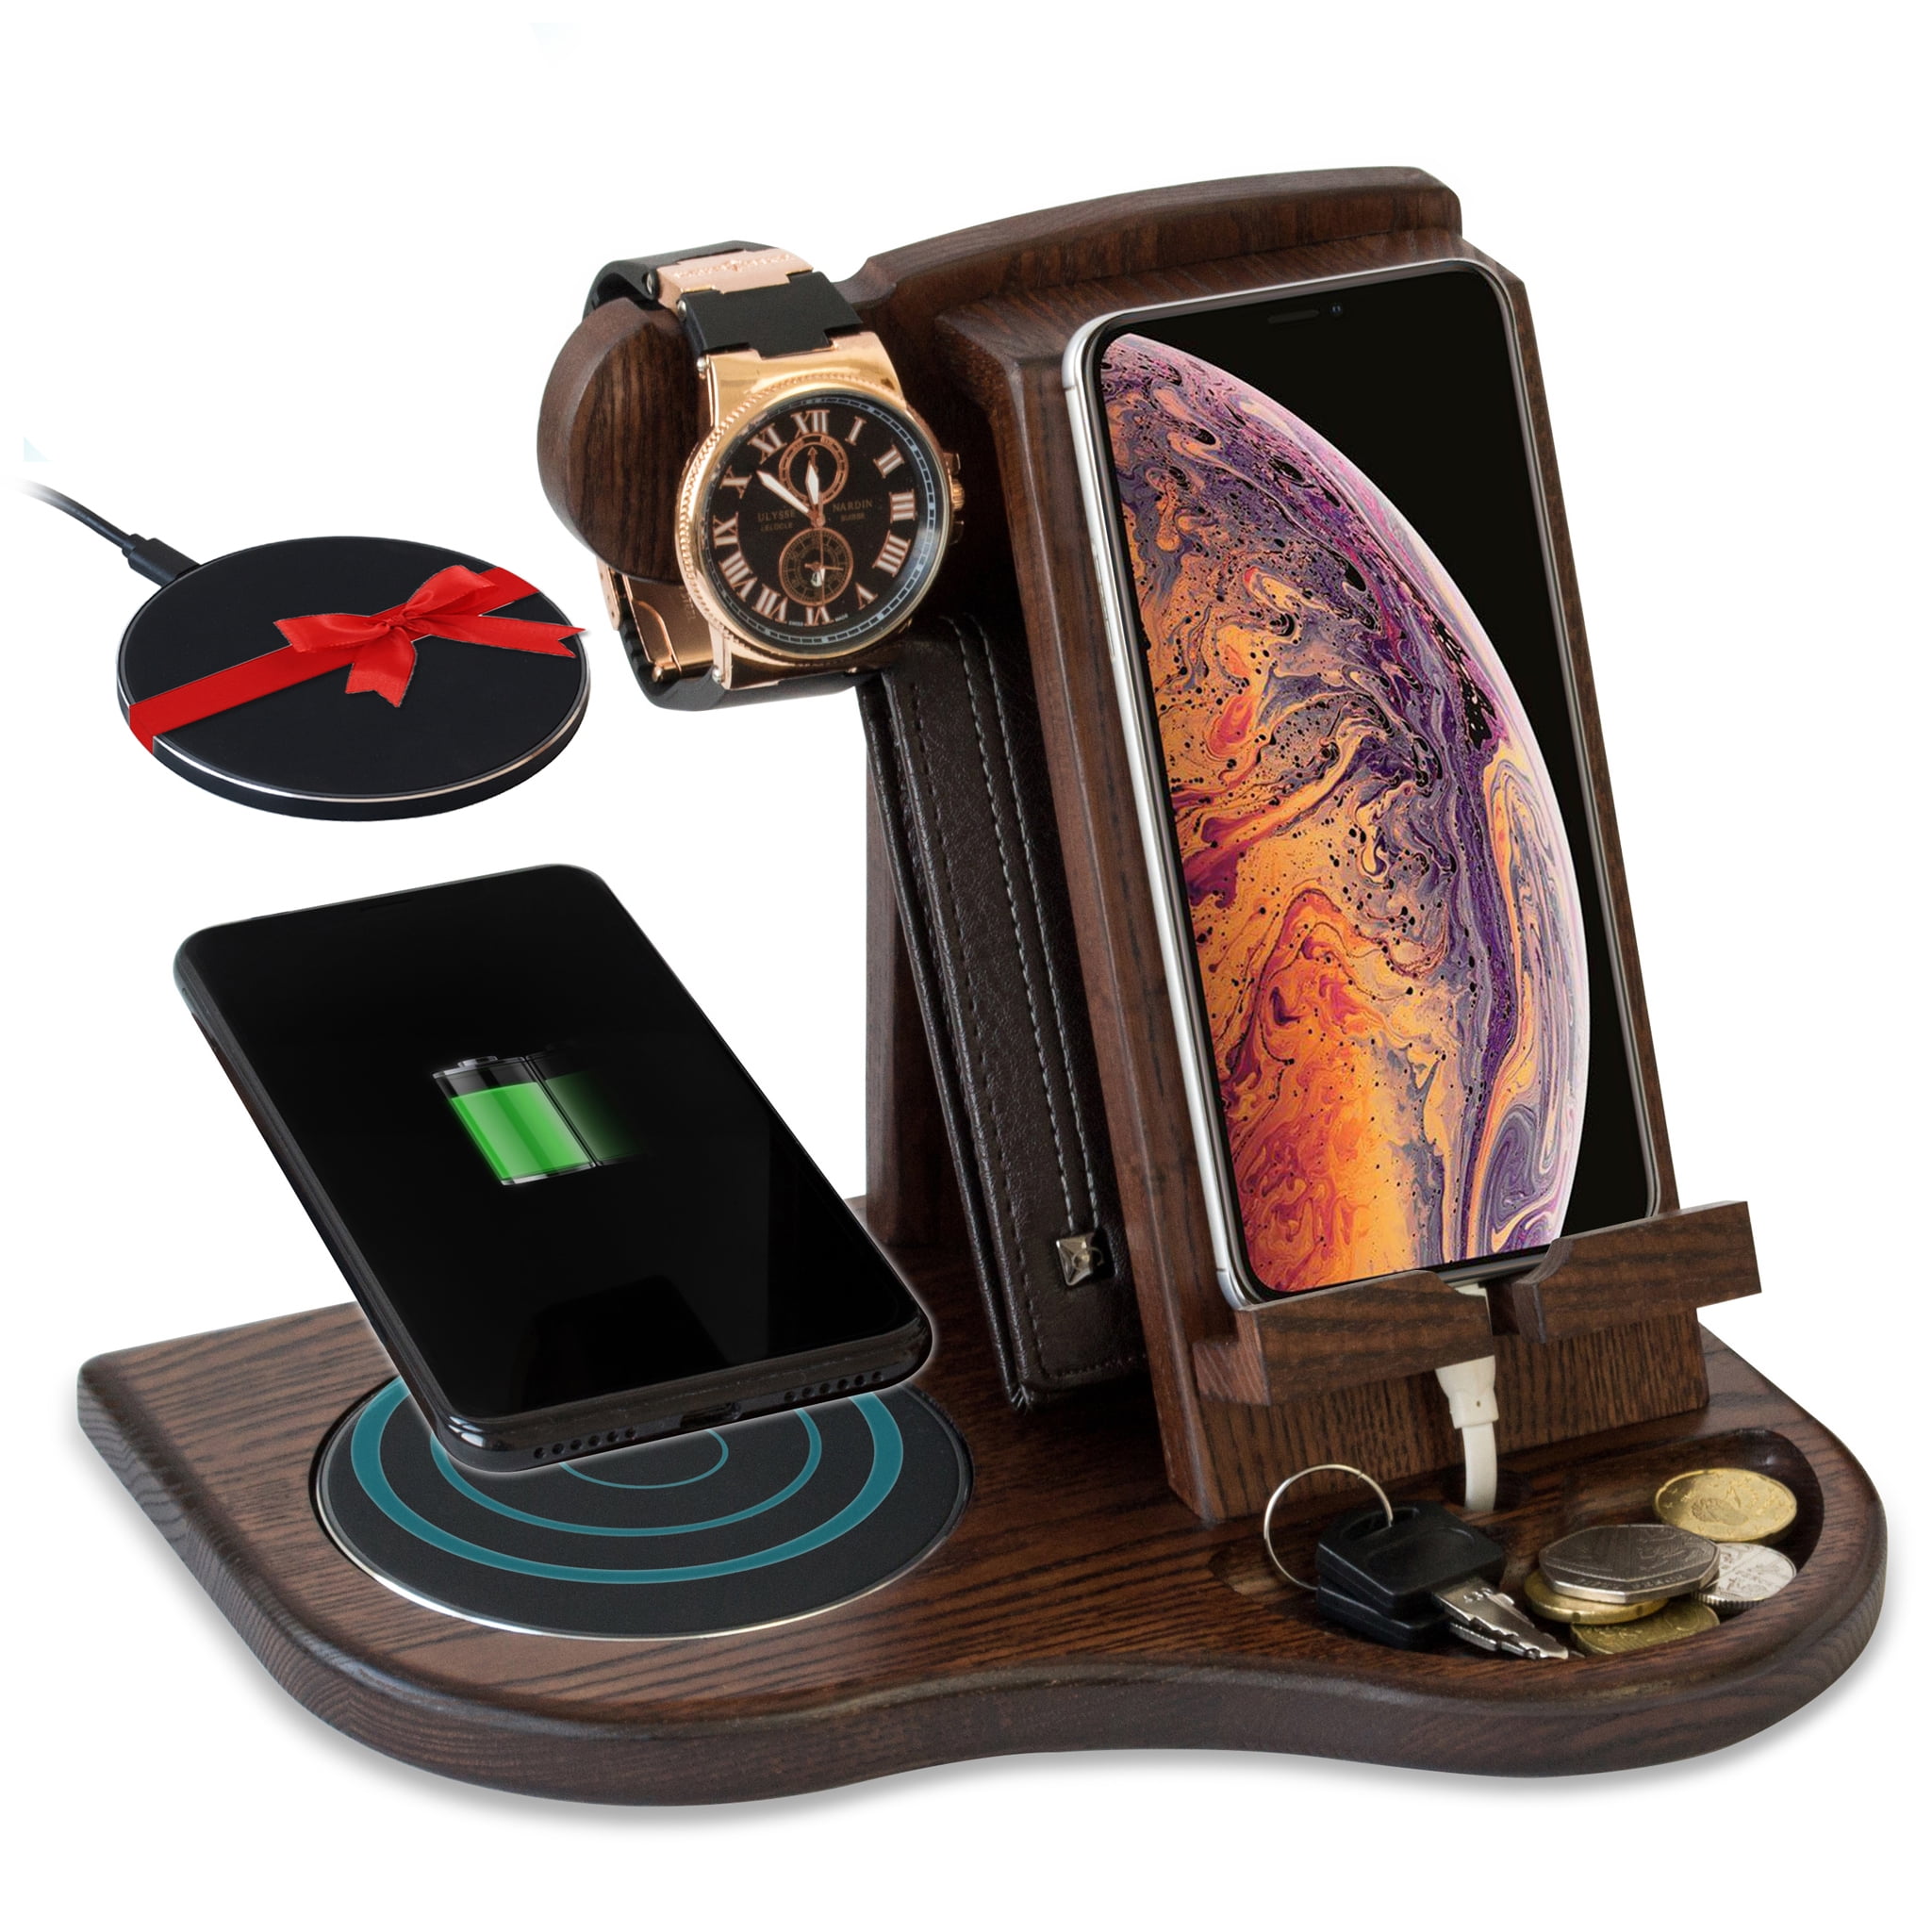  Docking Station PERSONALIZED MENS GIFT gifts for men Apple  Watch Stand wooden docking station gift ideas for men gifts for boyfriend :  Handmade Products